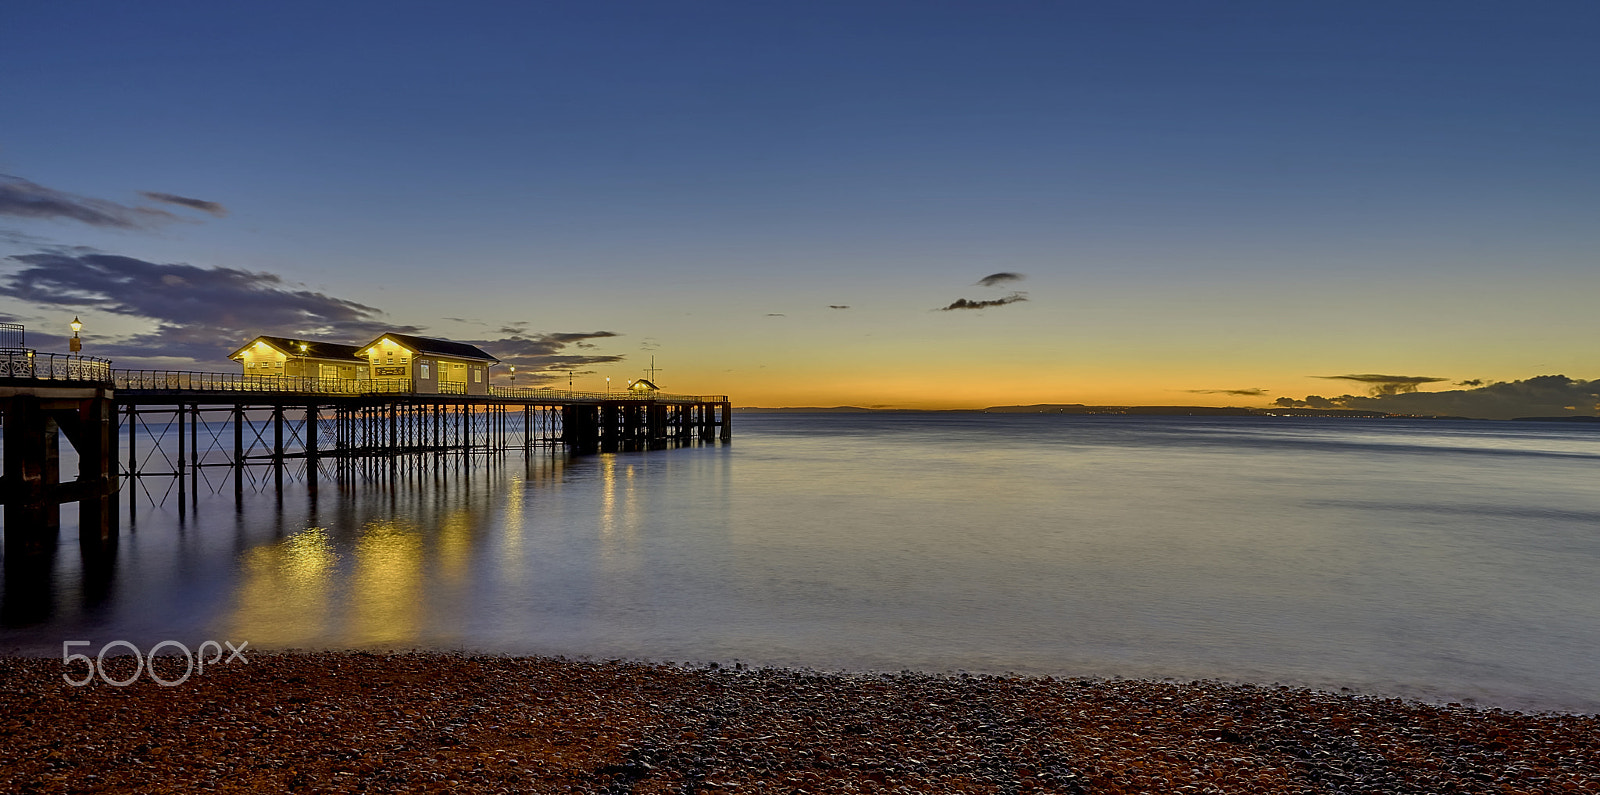 Sony a7 sample photo. Sunrise, penarth pier, south wales photography